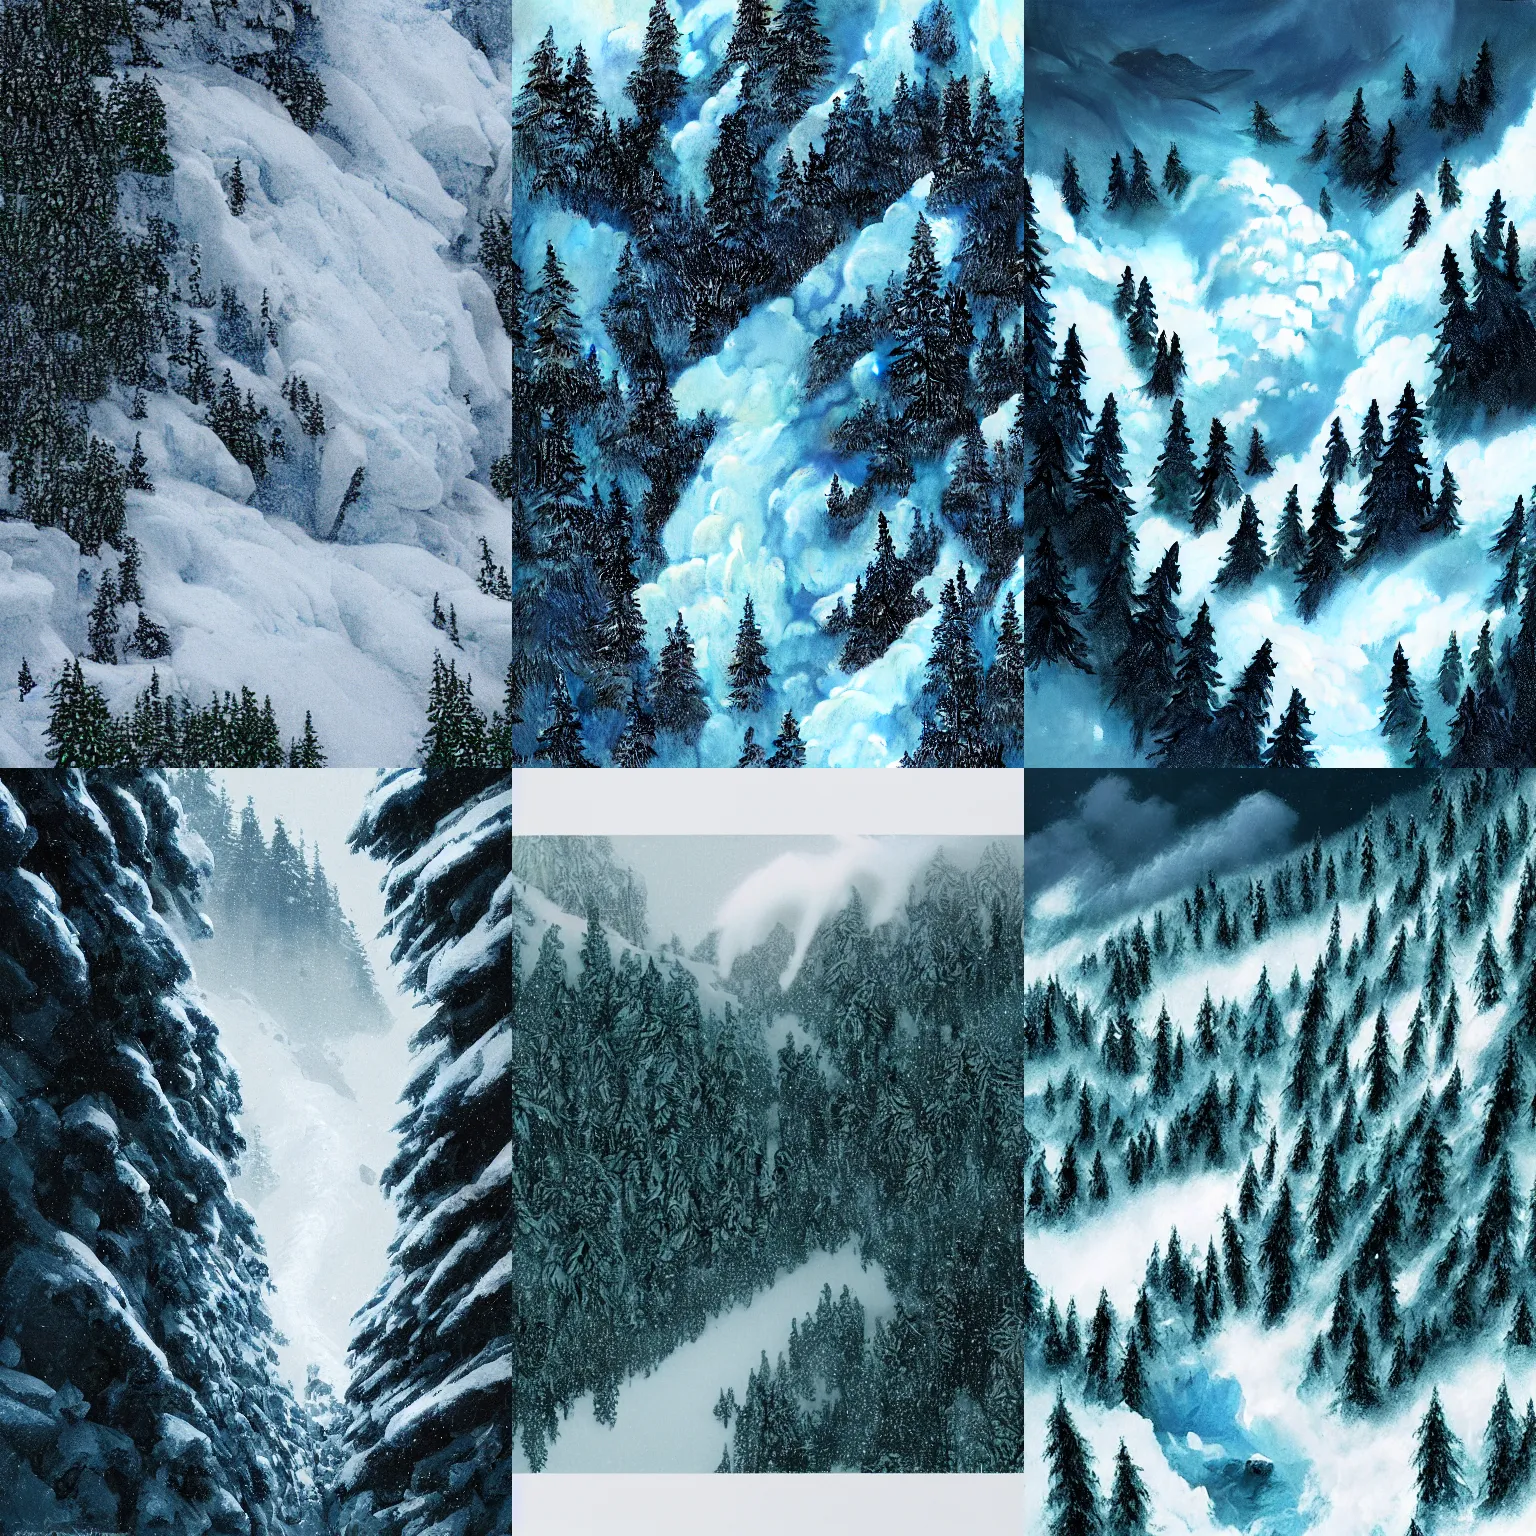 Prompt: thundering avalanche avalanche avalanche of glacier snow falling down the mountain, dashcam footage, GoPro, green pine trees and snow billowing up, national geographic photo report on avalanches, hyperdetailed, vibrant, stunning, seen from below, mountains avalanche concept art, digital illustration by greg rutkowski